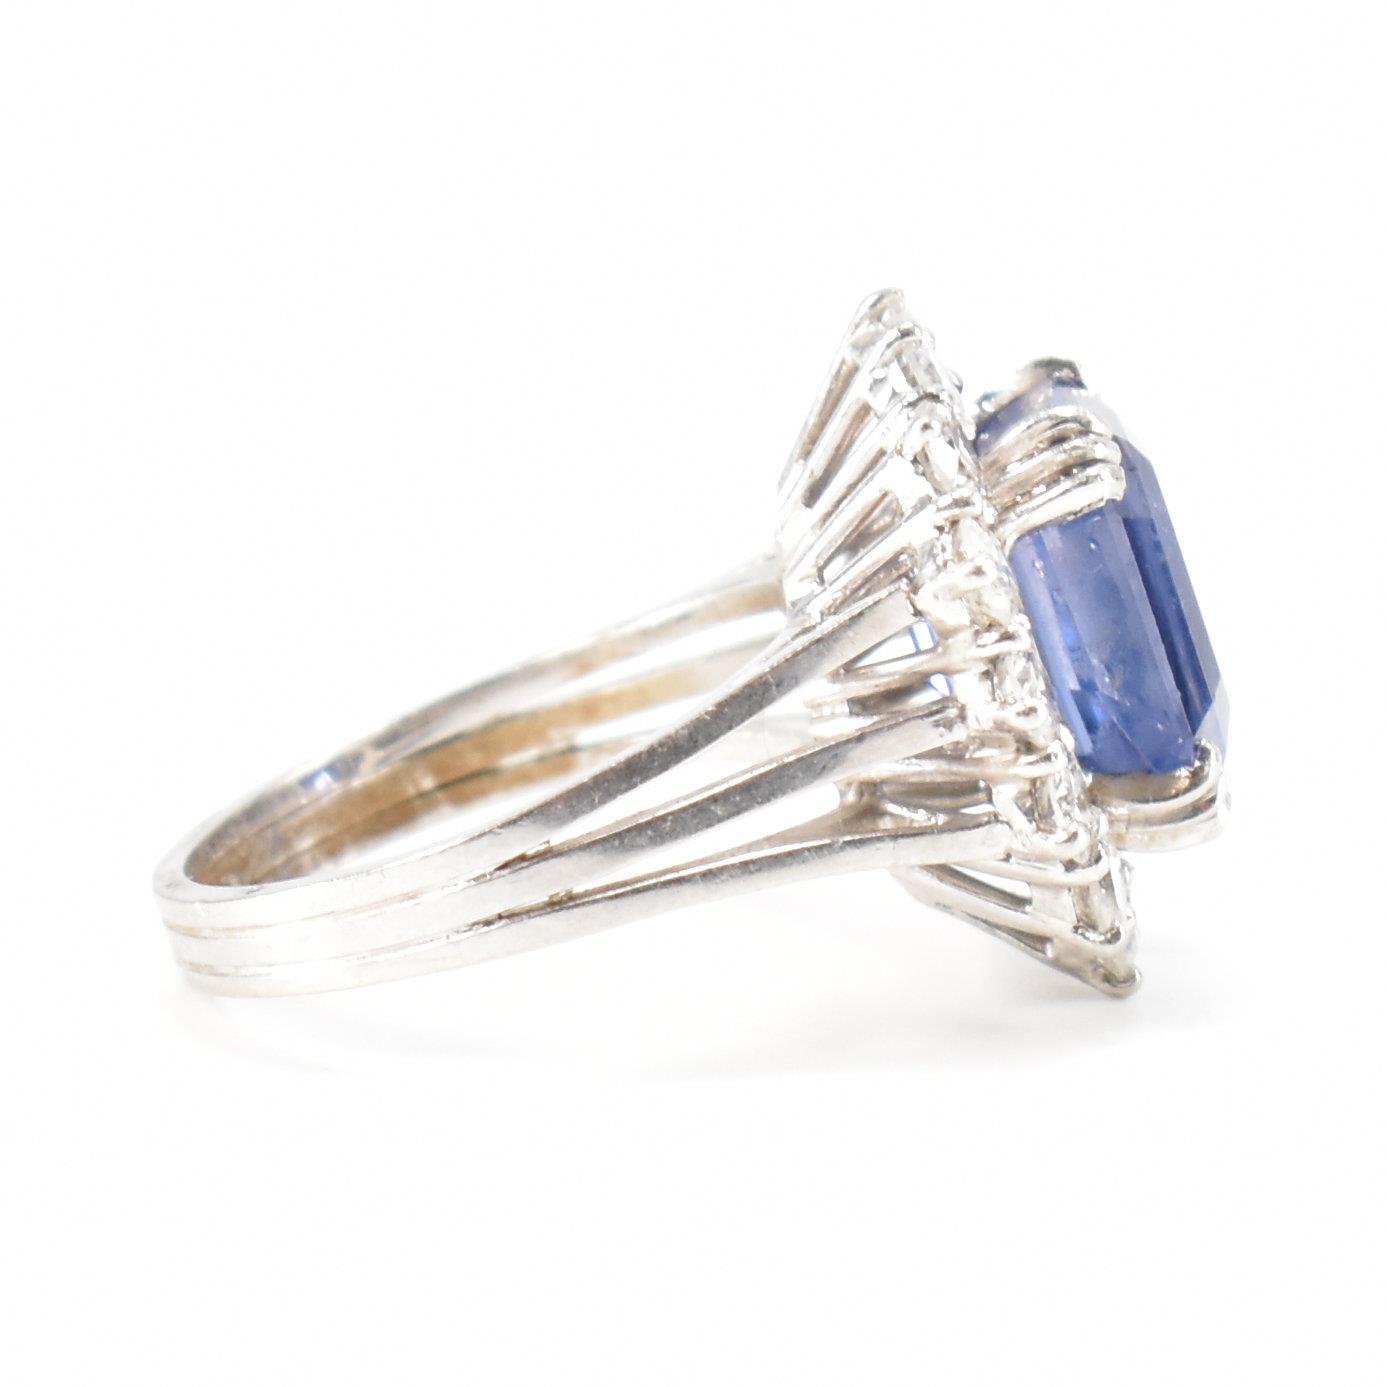 FRENCH CEYLON COLOUR CHANGE SAPPHIRE & DIAMOND CLUSTER RING - Image 5 of 9